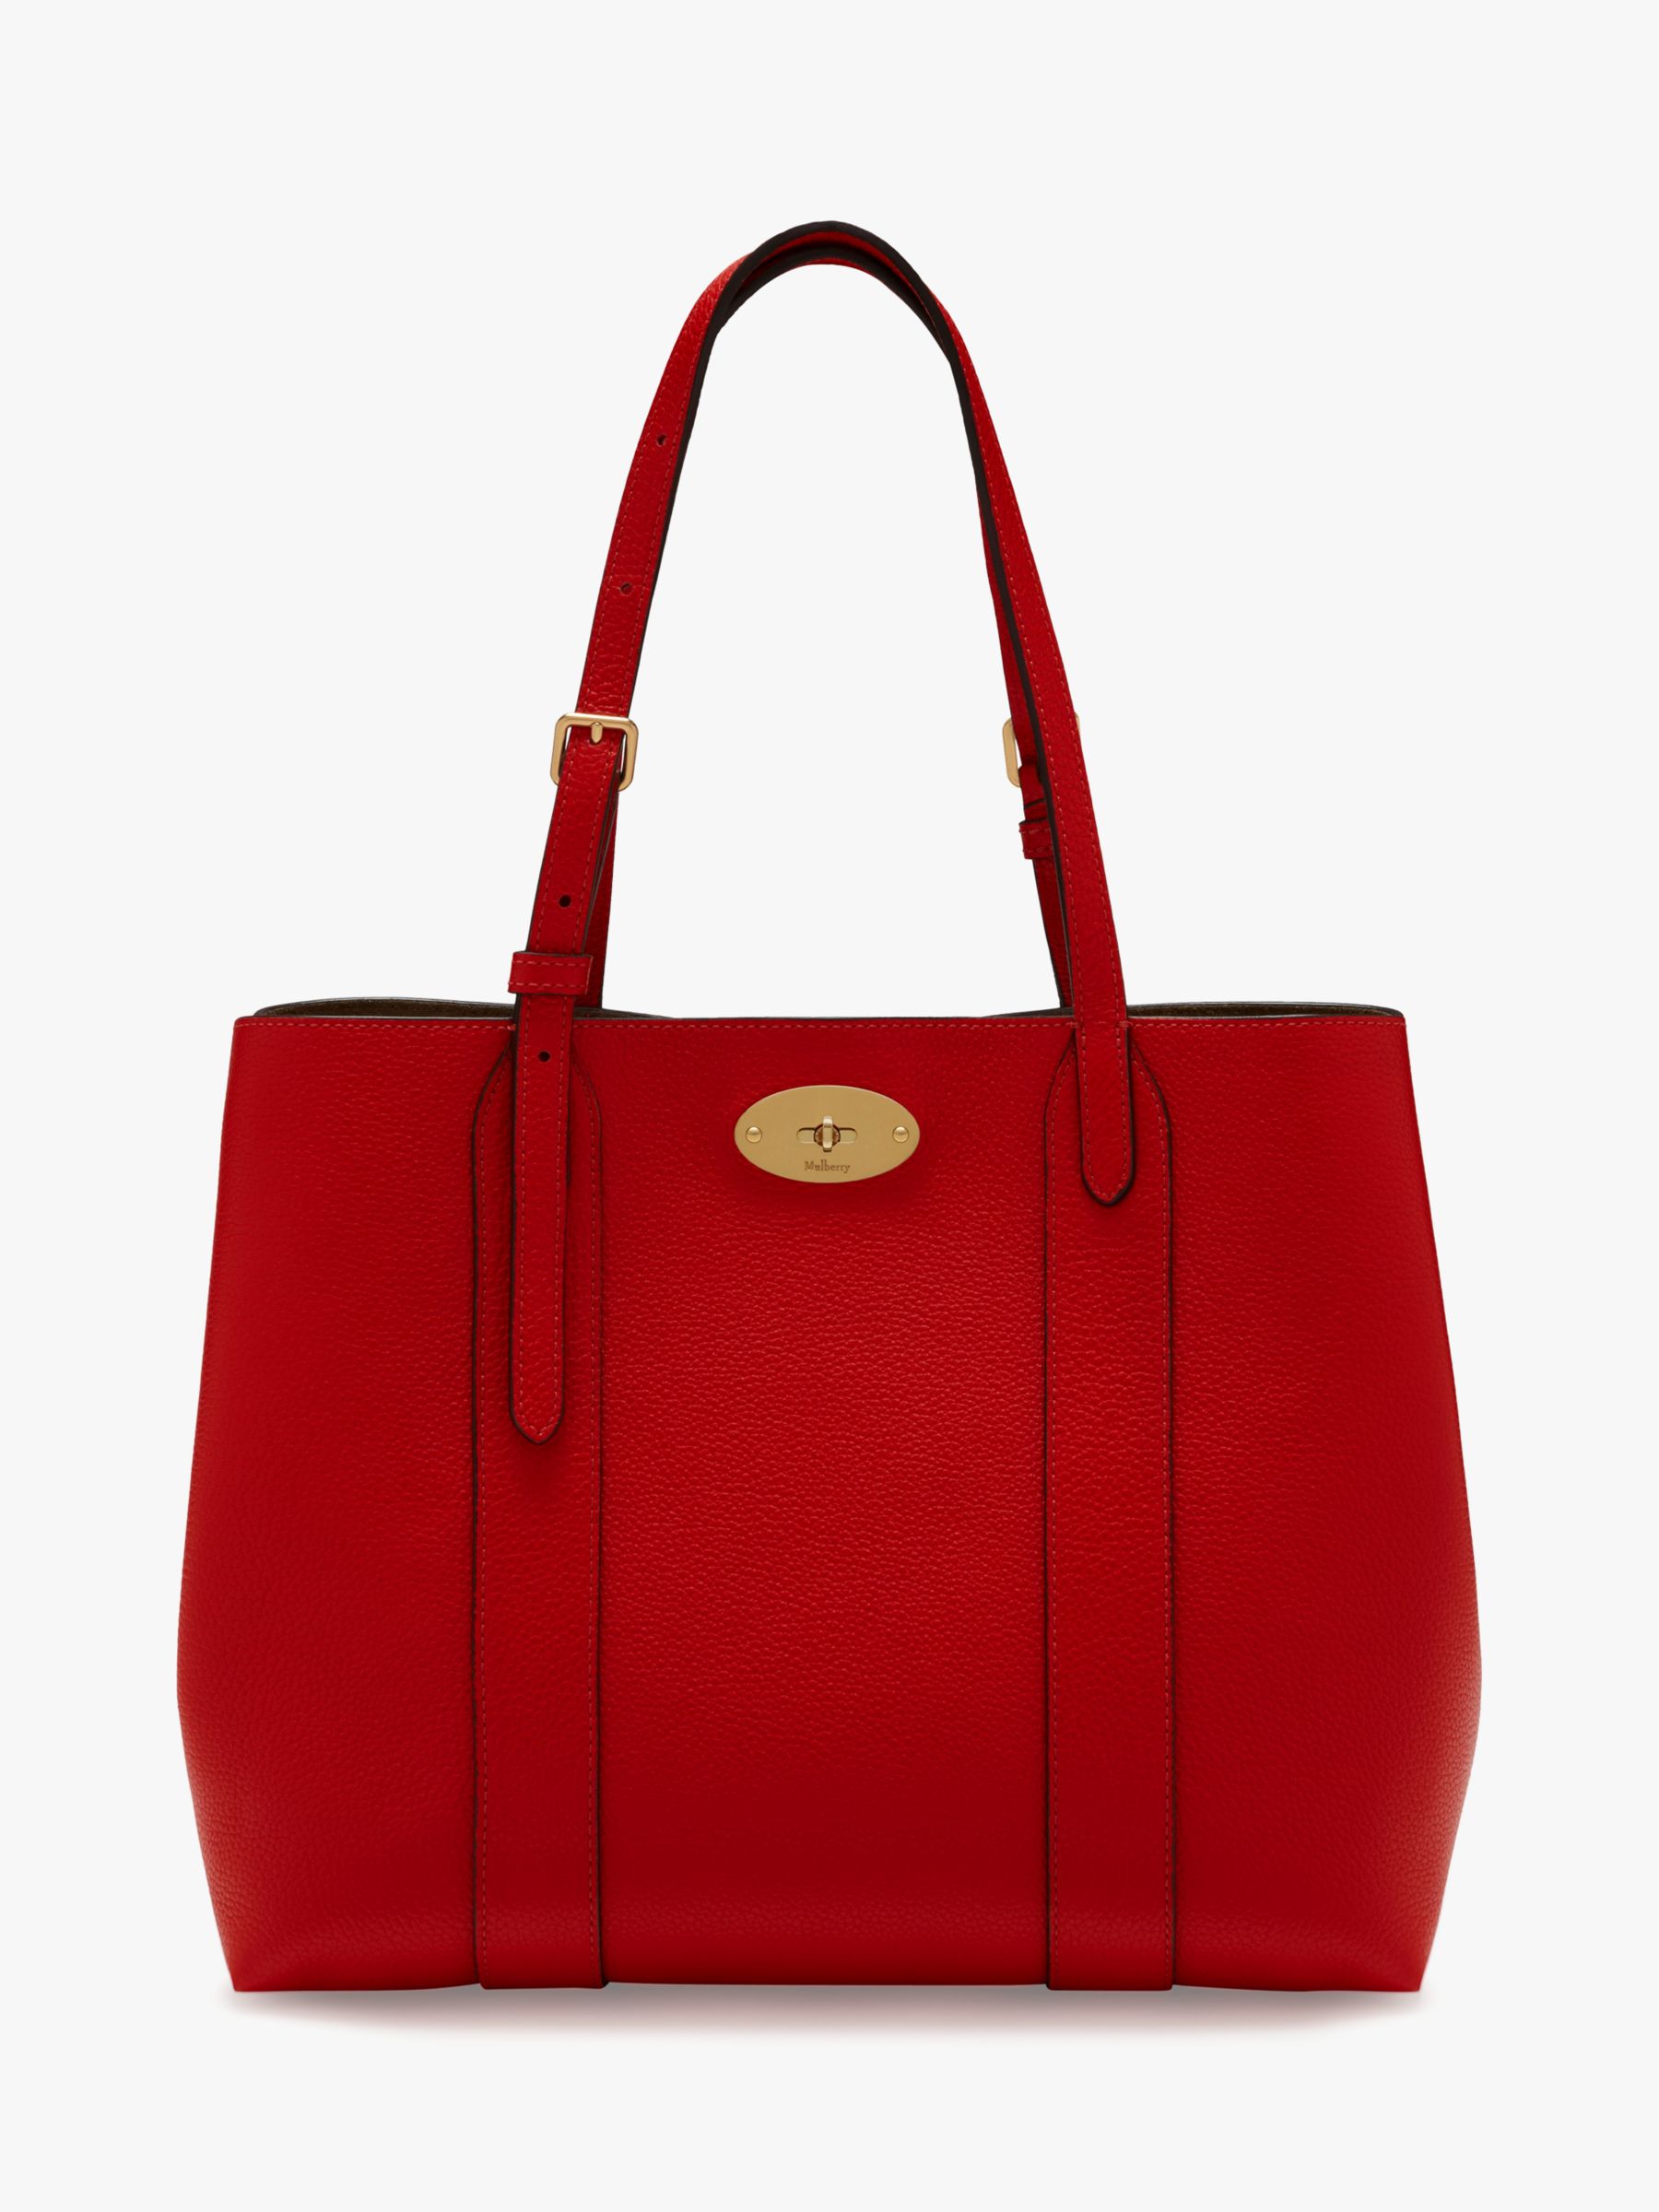 Mulberry Small Bayswater Classic Grain Leather Tote Bag, Ruby Red